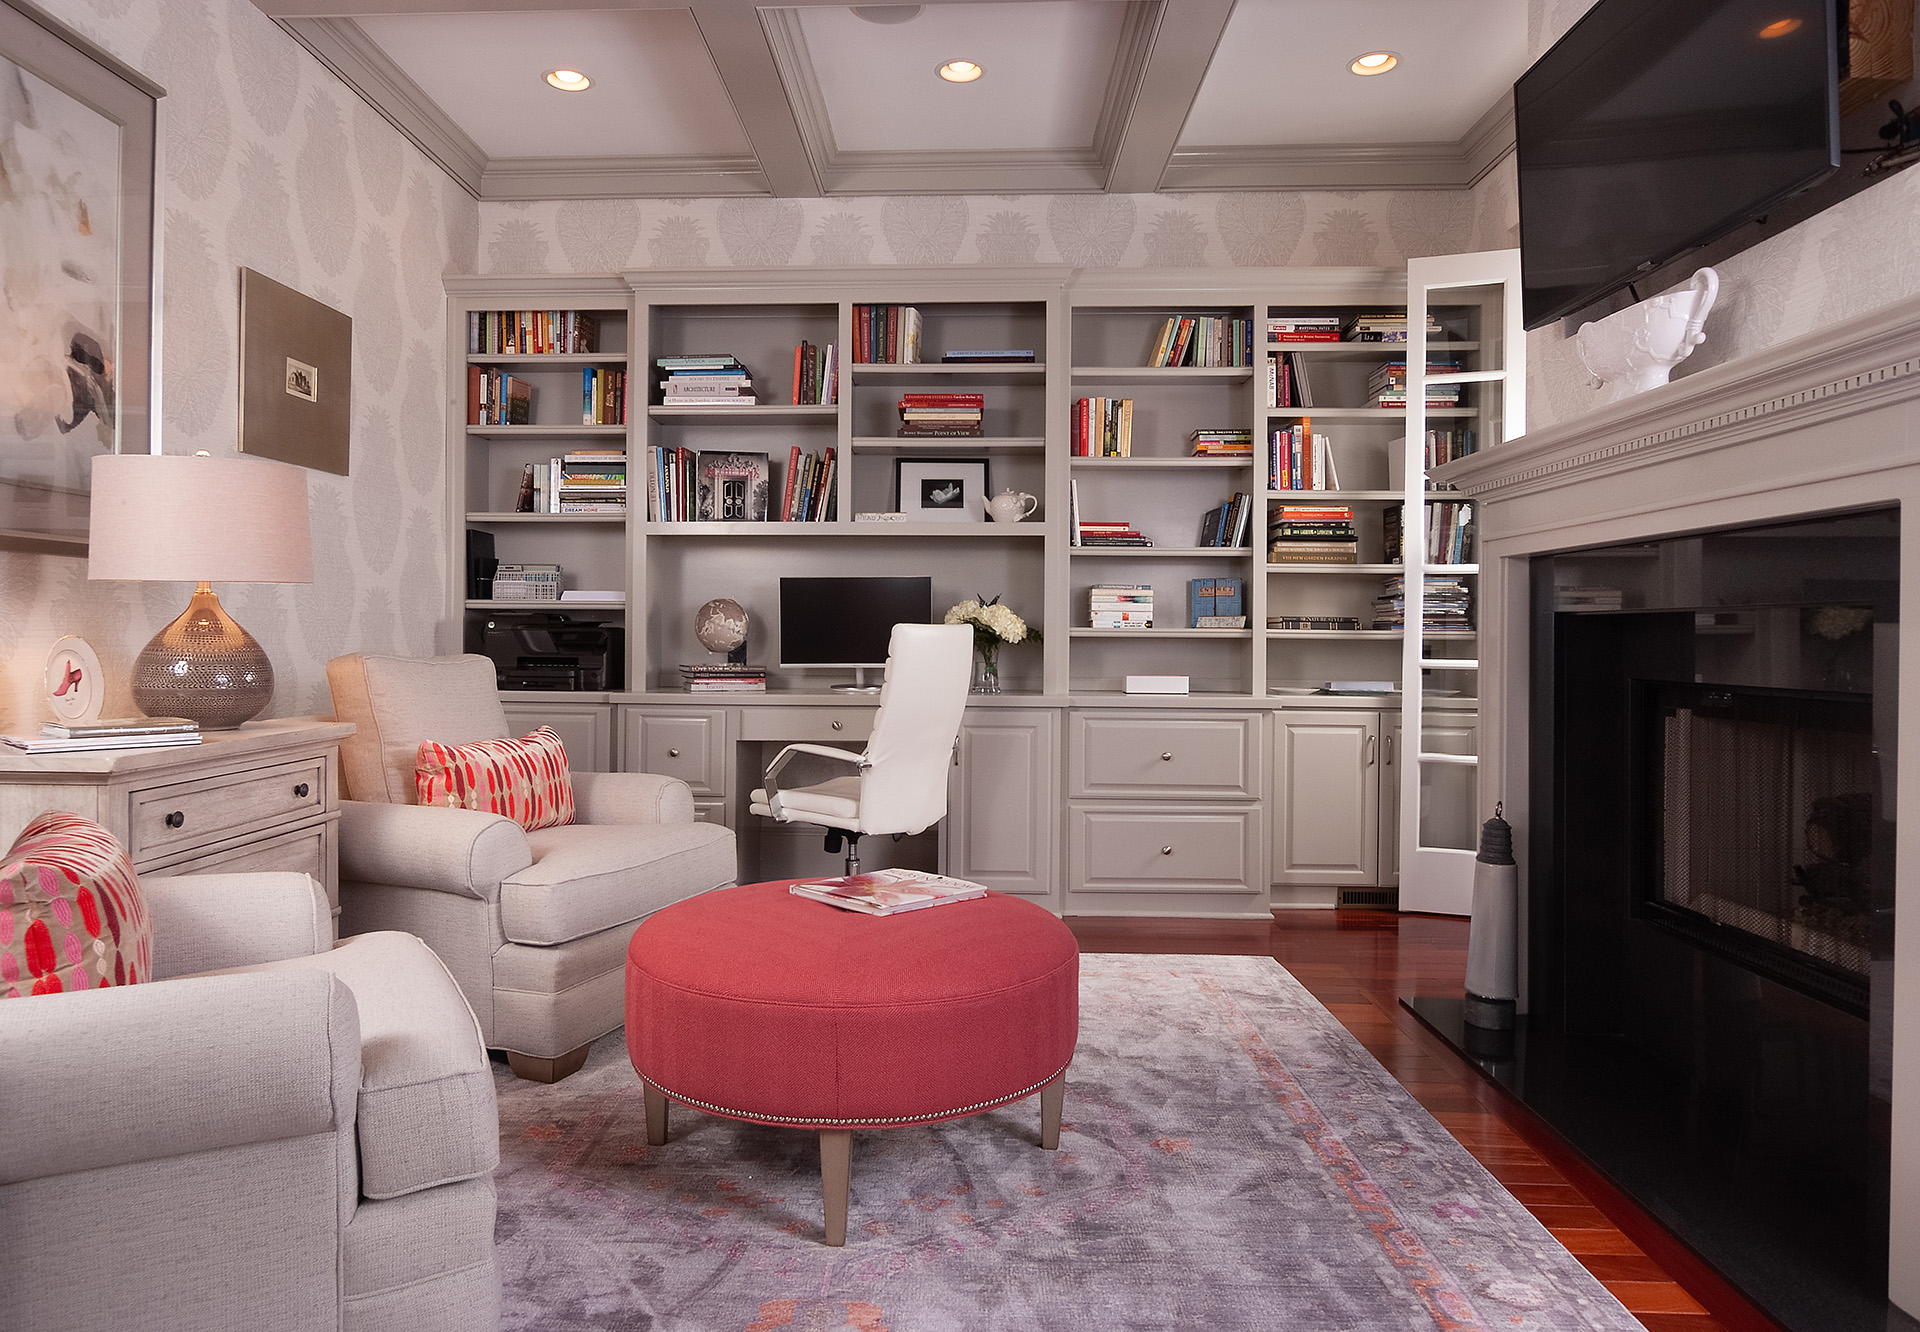 Built-in shelving with a desk in a basement with a coffered ceiling. Grey colour scheme with pink ottoman and throw pillows on armchairs.